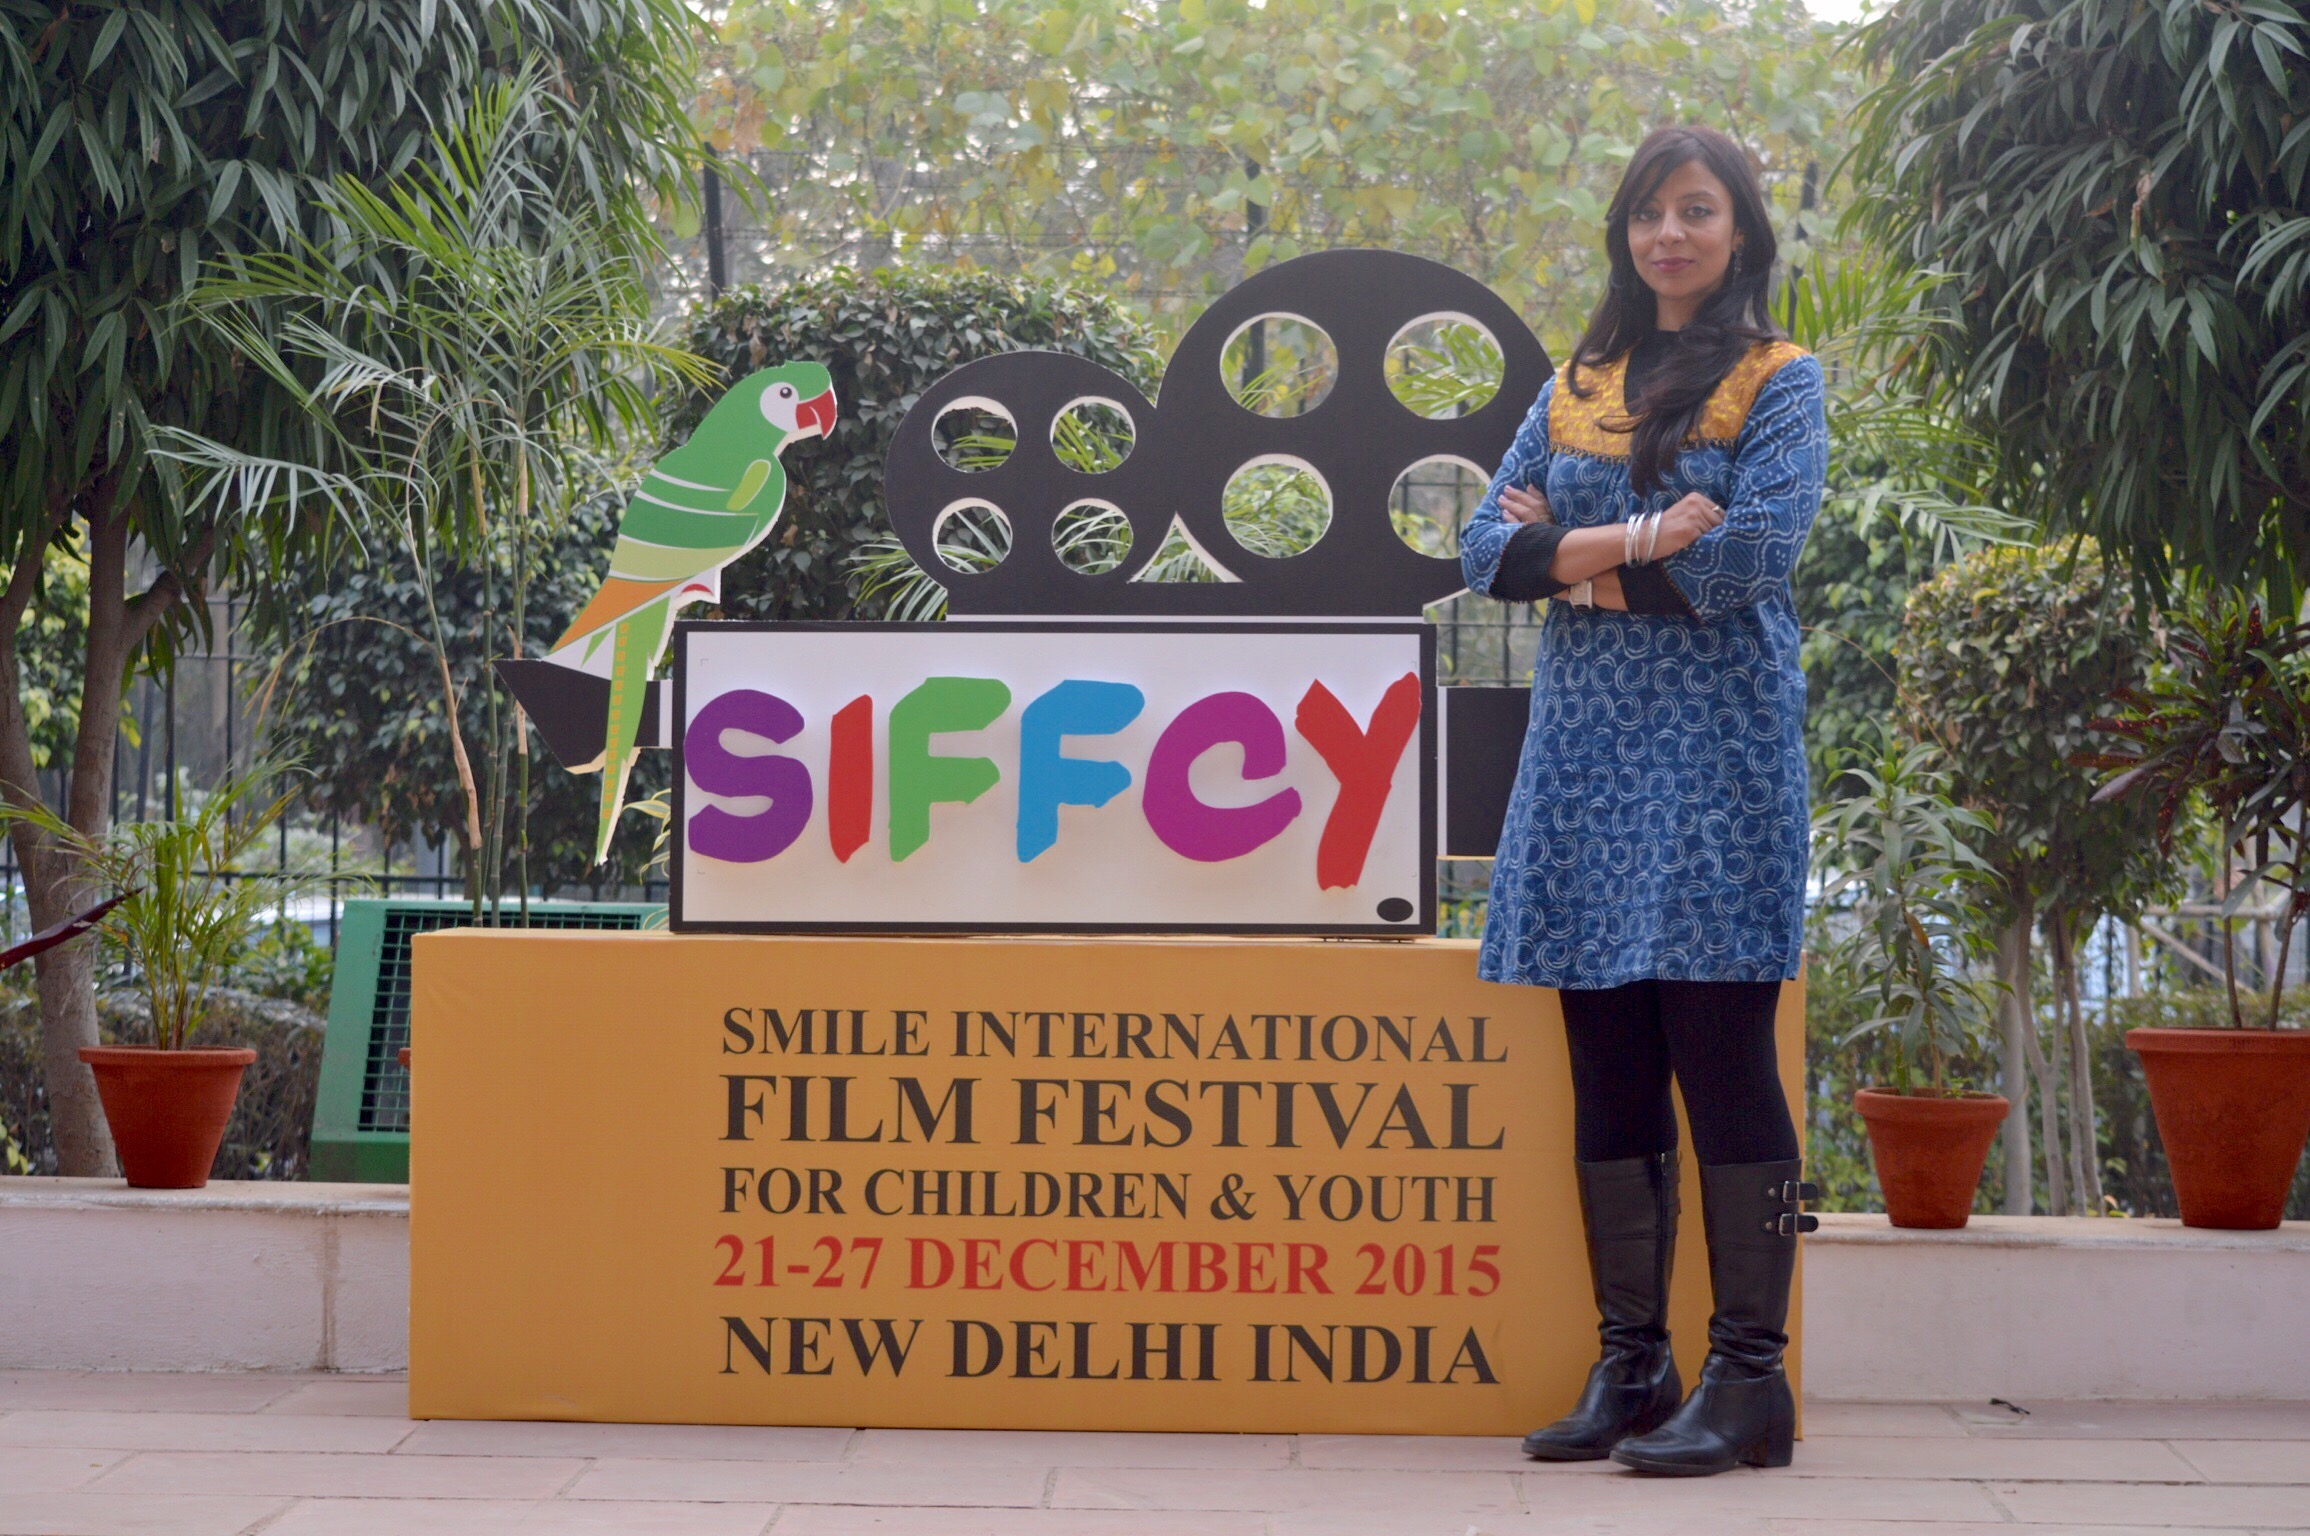 Amazing workshops conducted by ‘Smile International Film Festival’